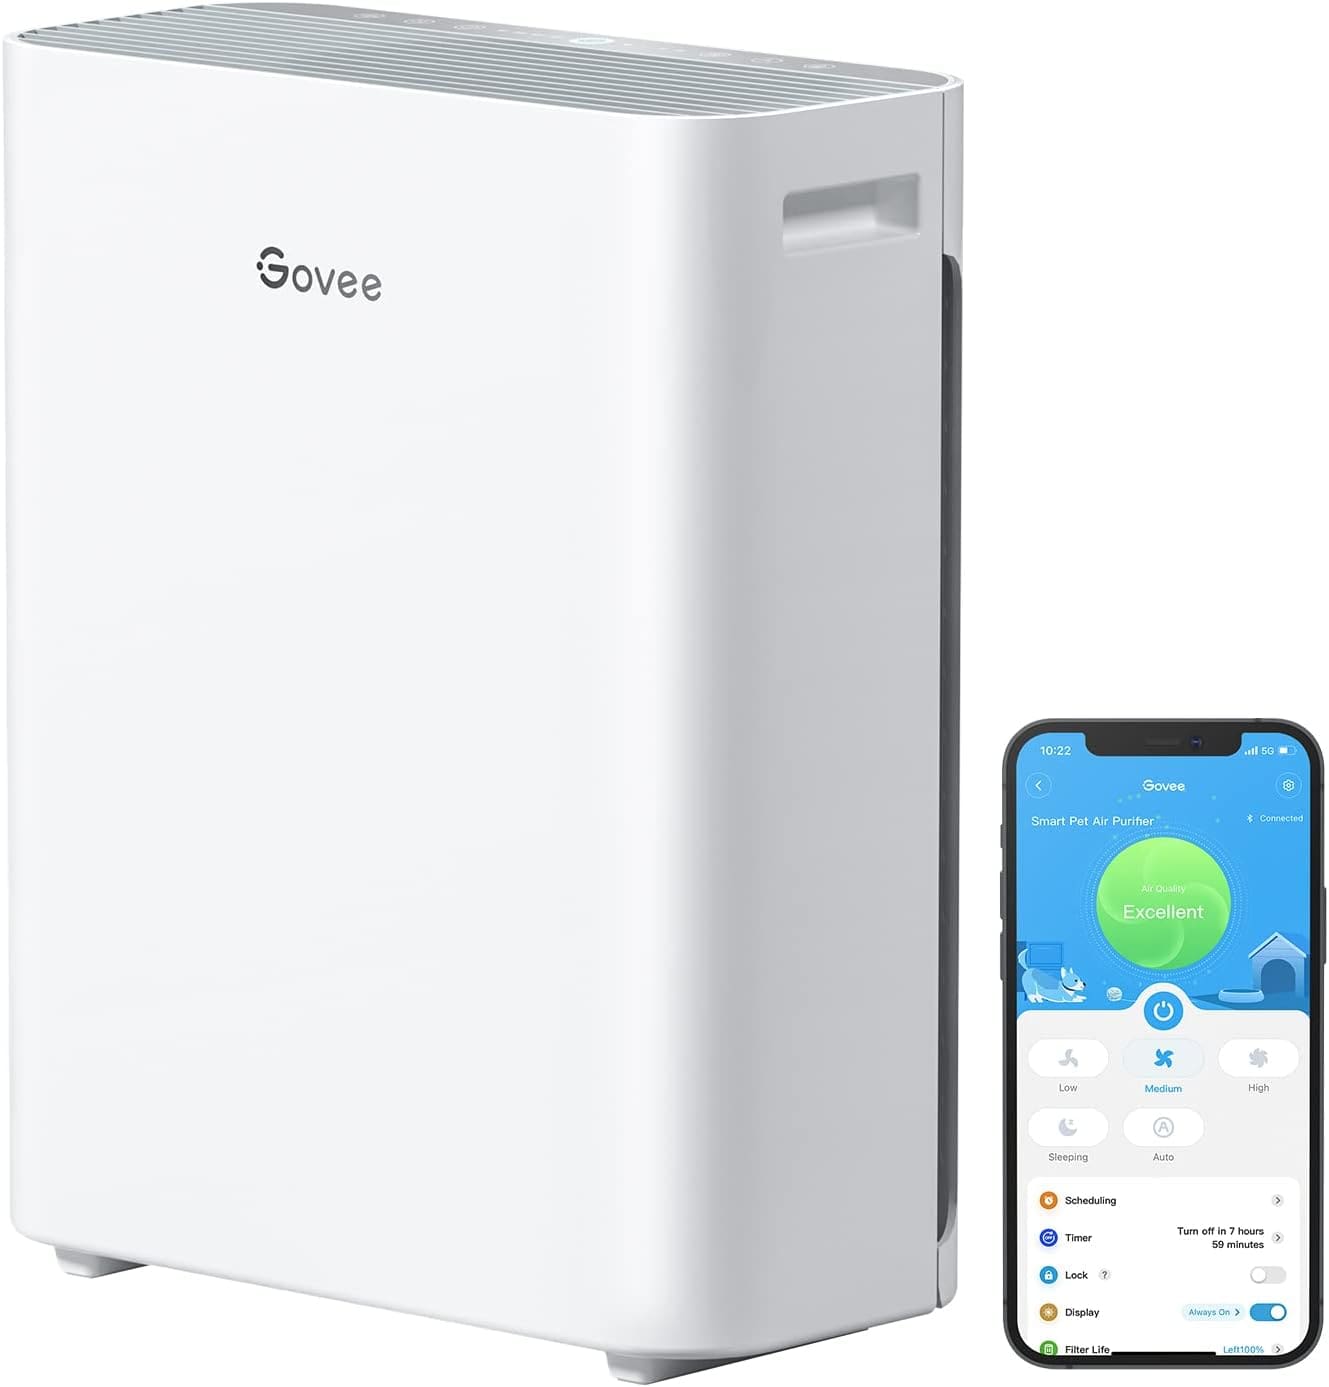 Govee smart air purifier for pets